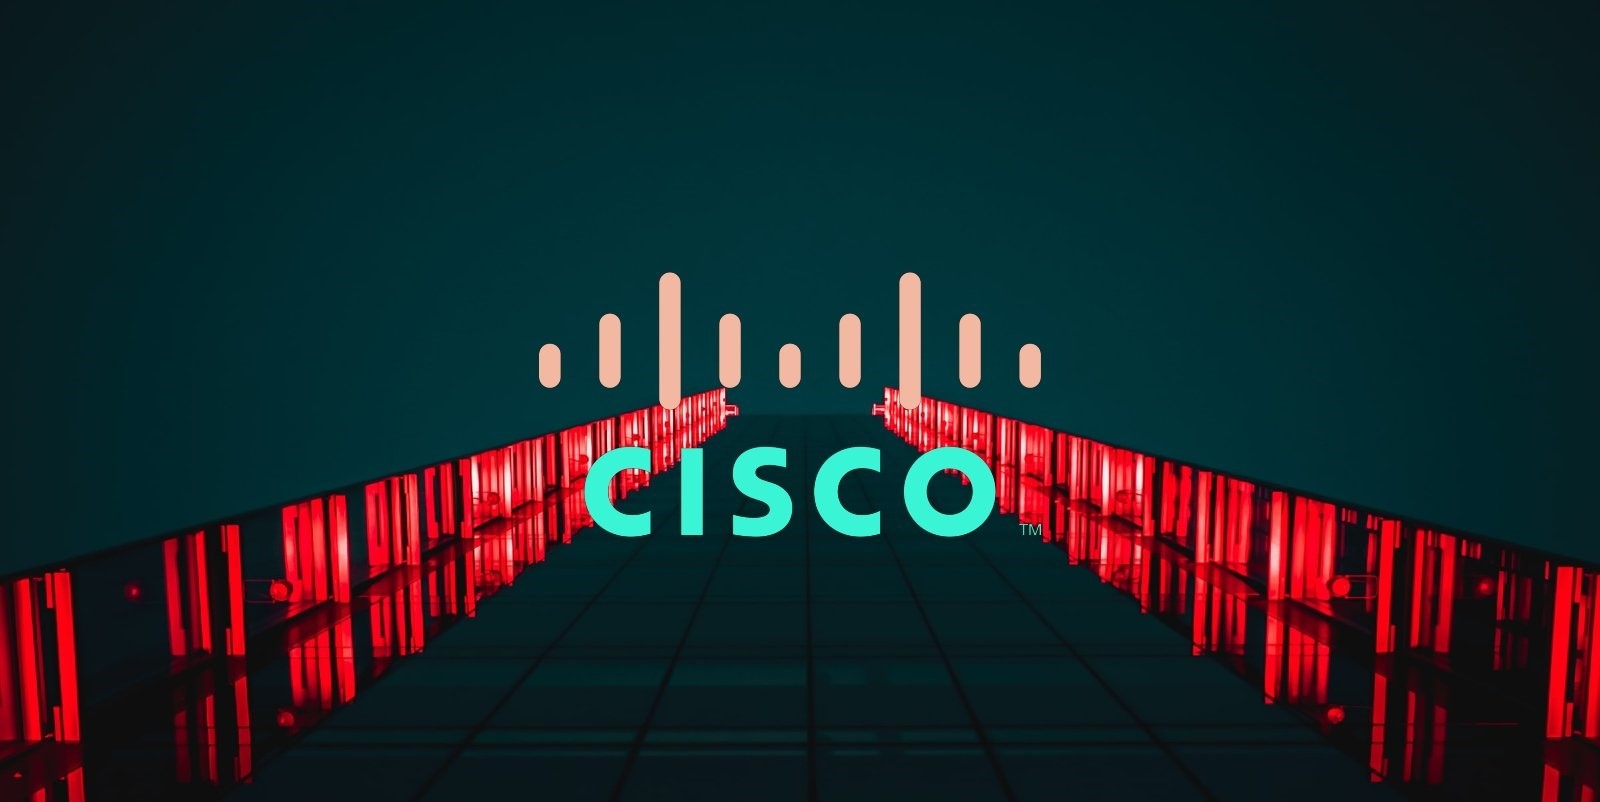 Cisco | SOSECURE MORE THAN SECURE